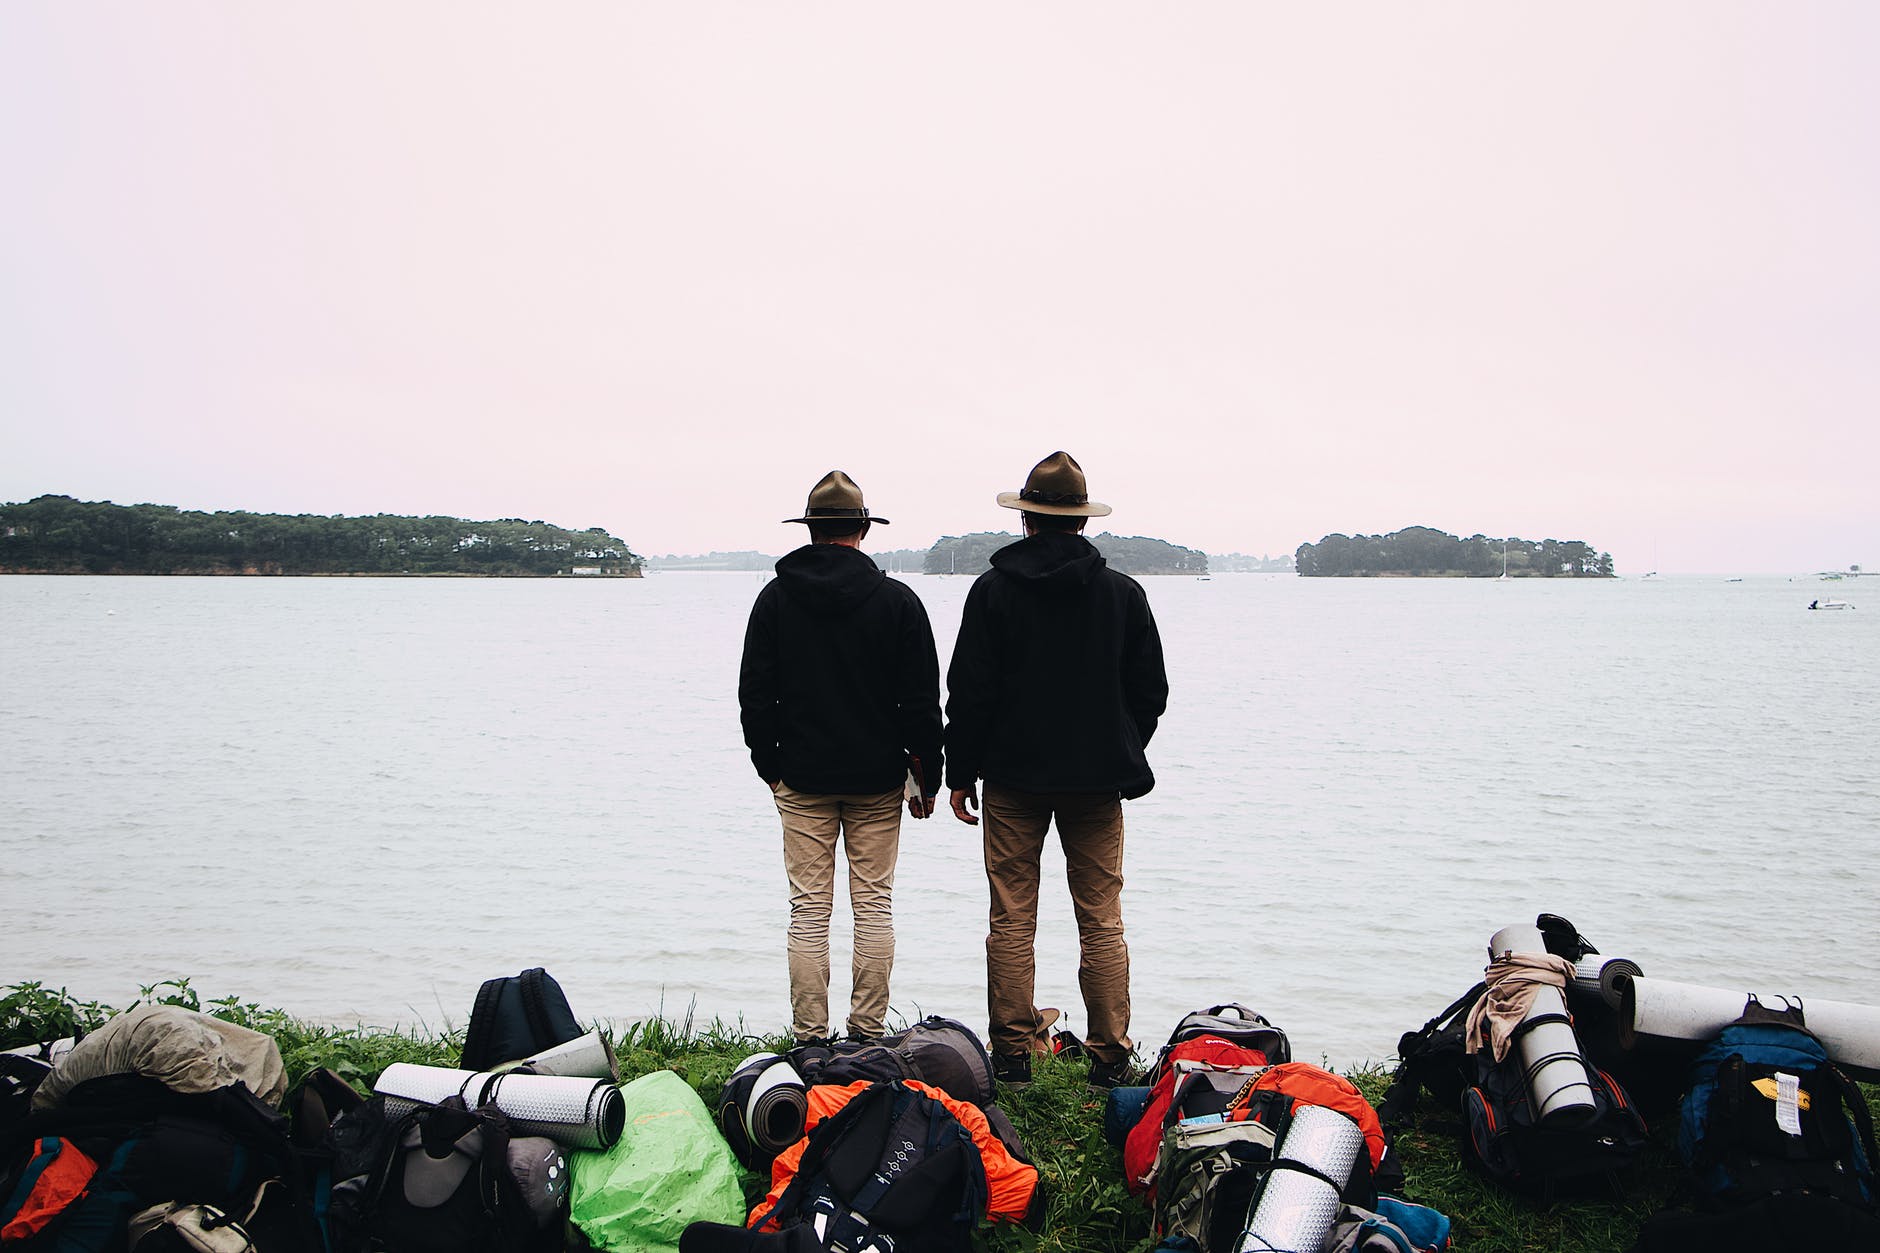 two men with hats and black jackets stand near body of water